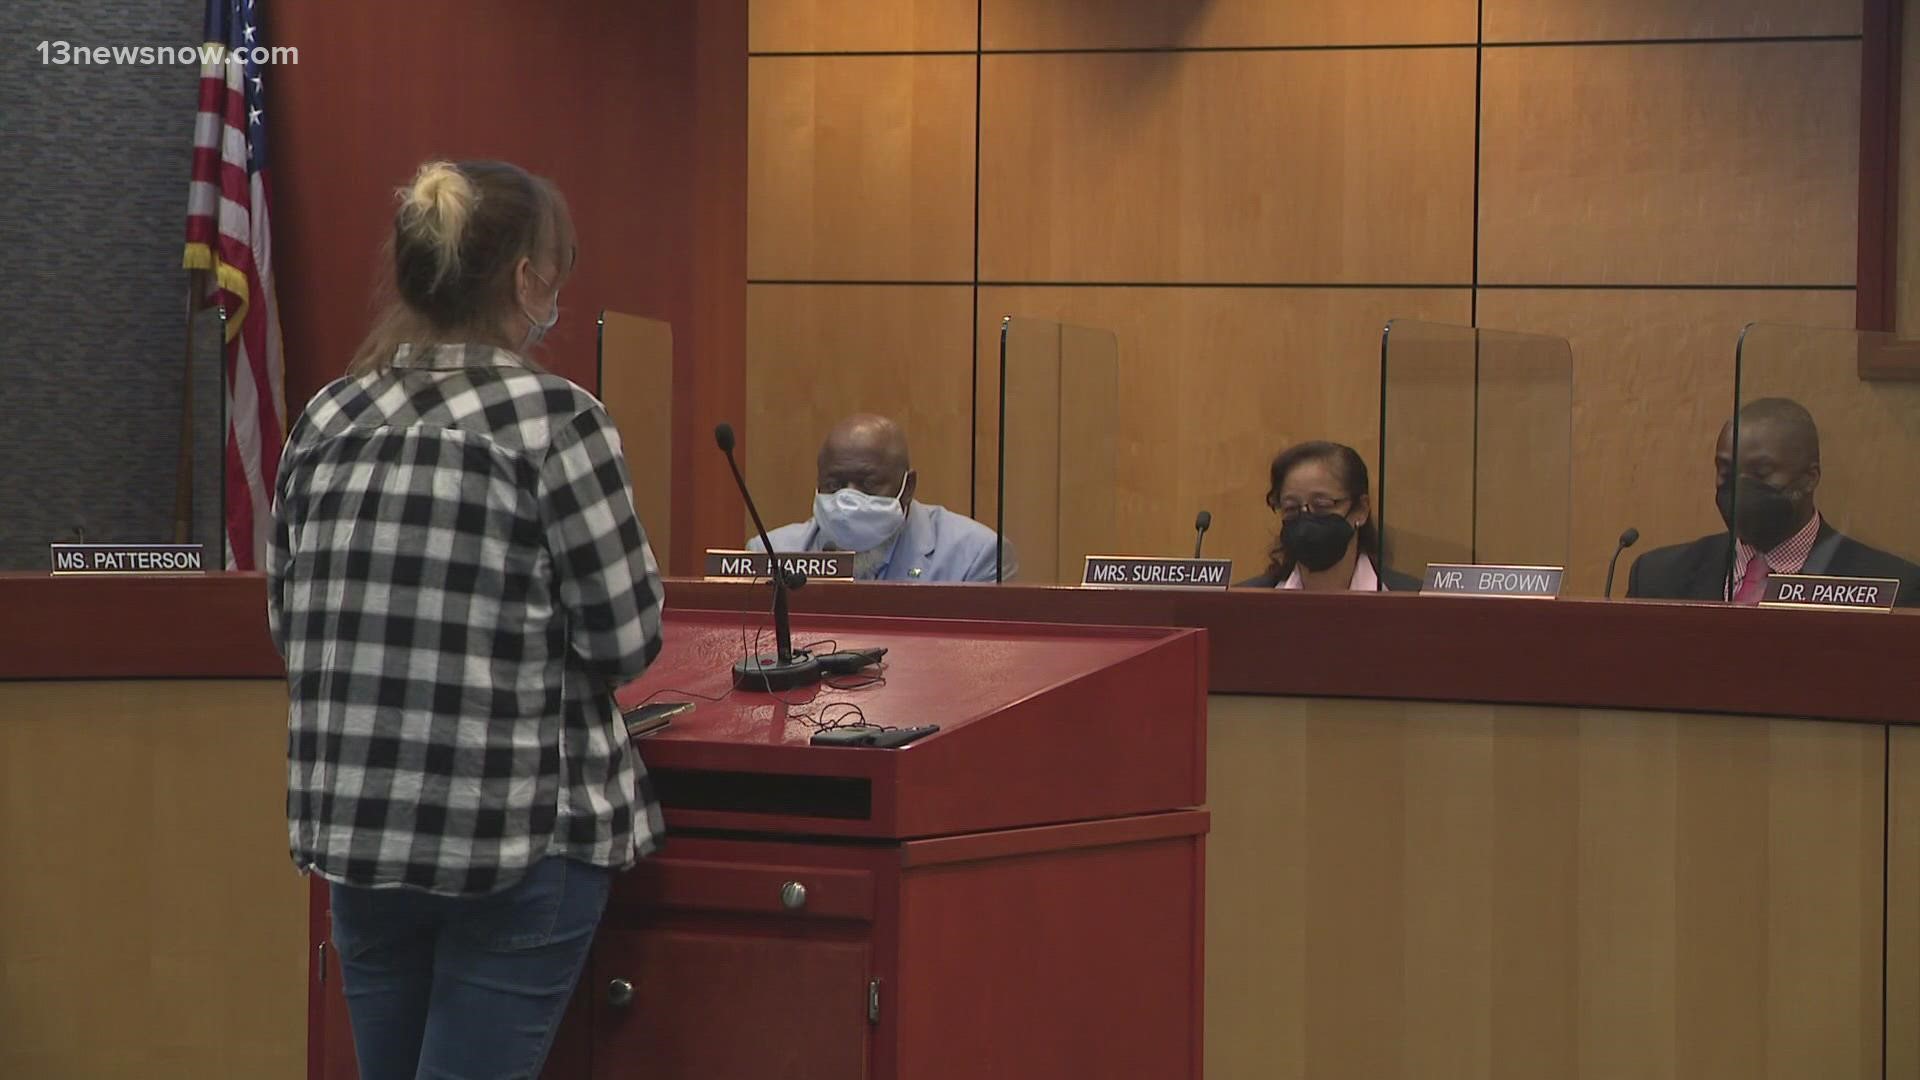 The Newport News school board voted to adopt the transgender policy during a meeting Thursday night.